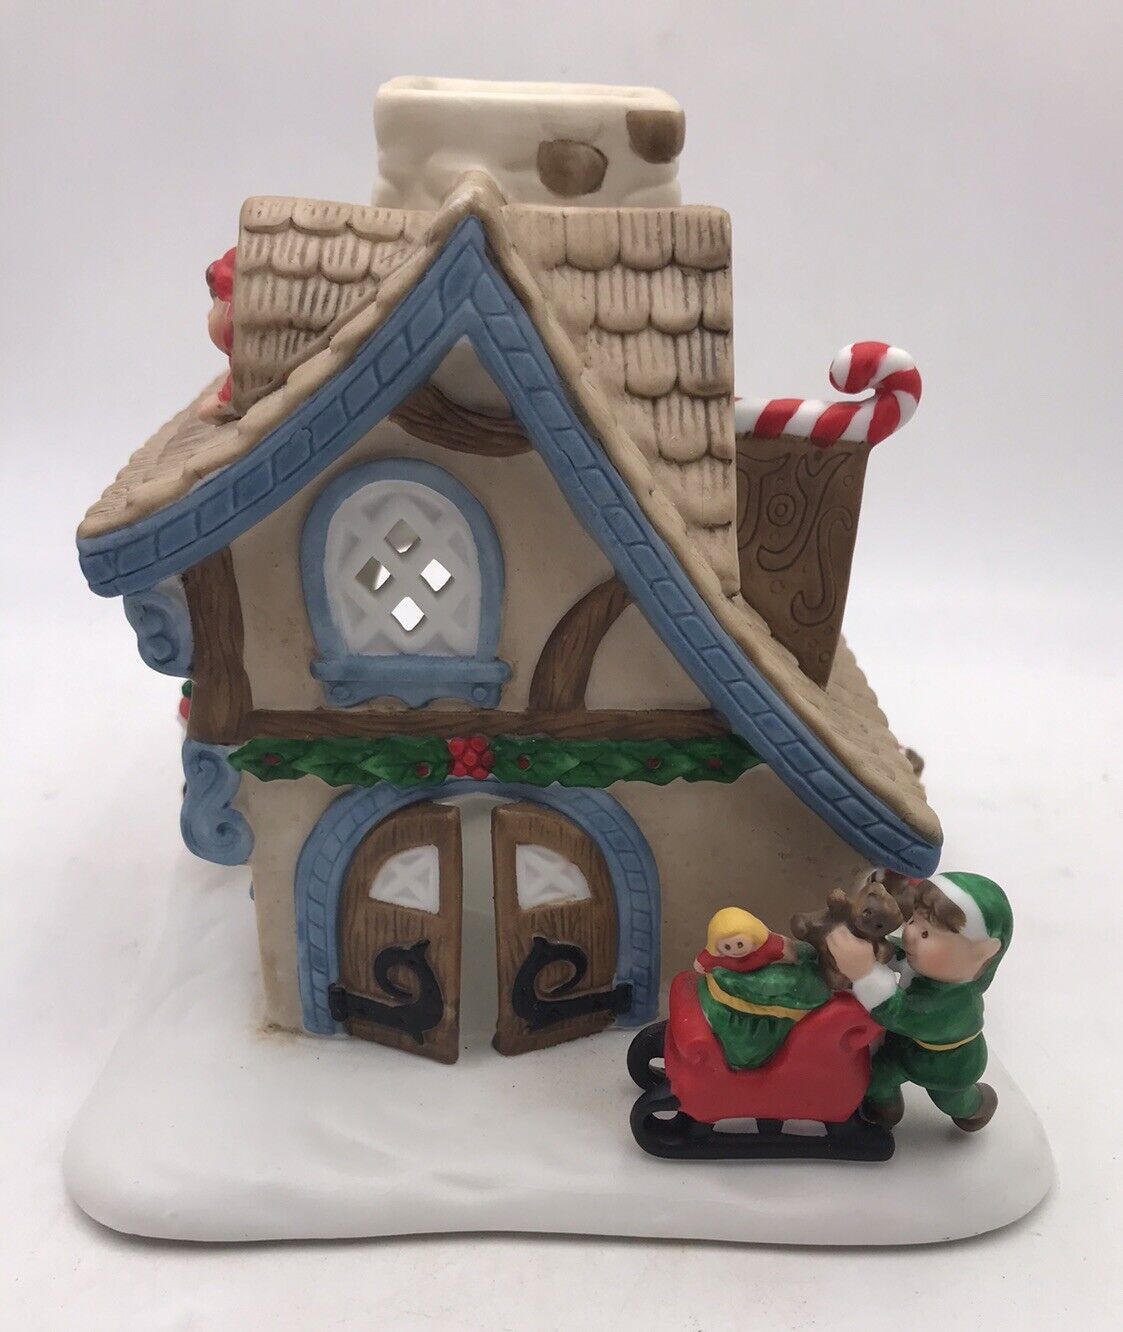 PartyLite Christmas House Candle Holder in Original Box Santa’s Workshop